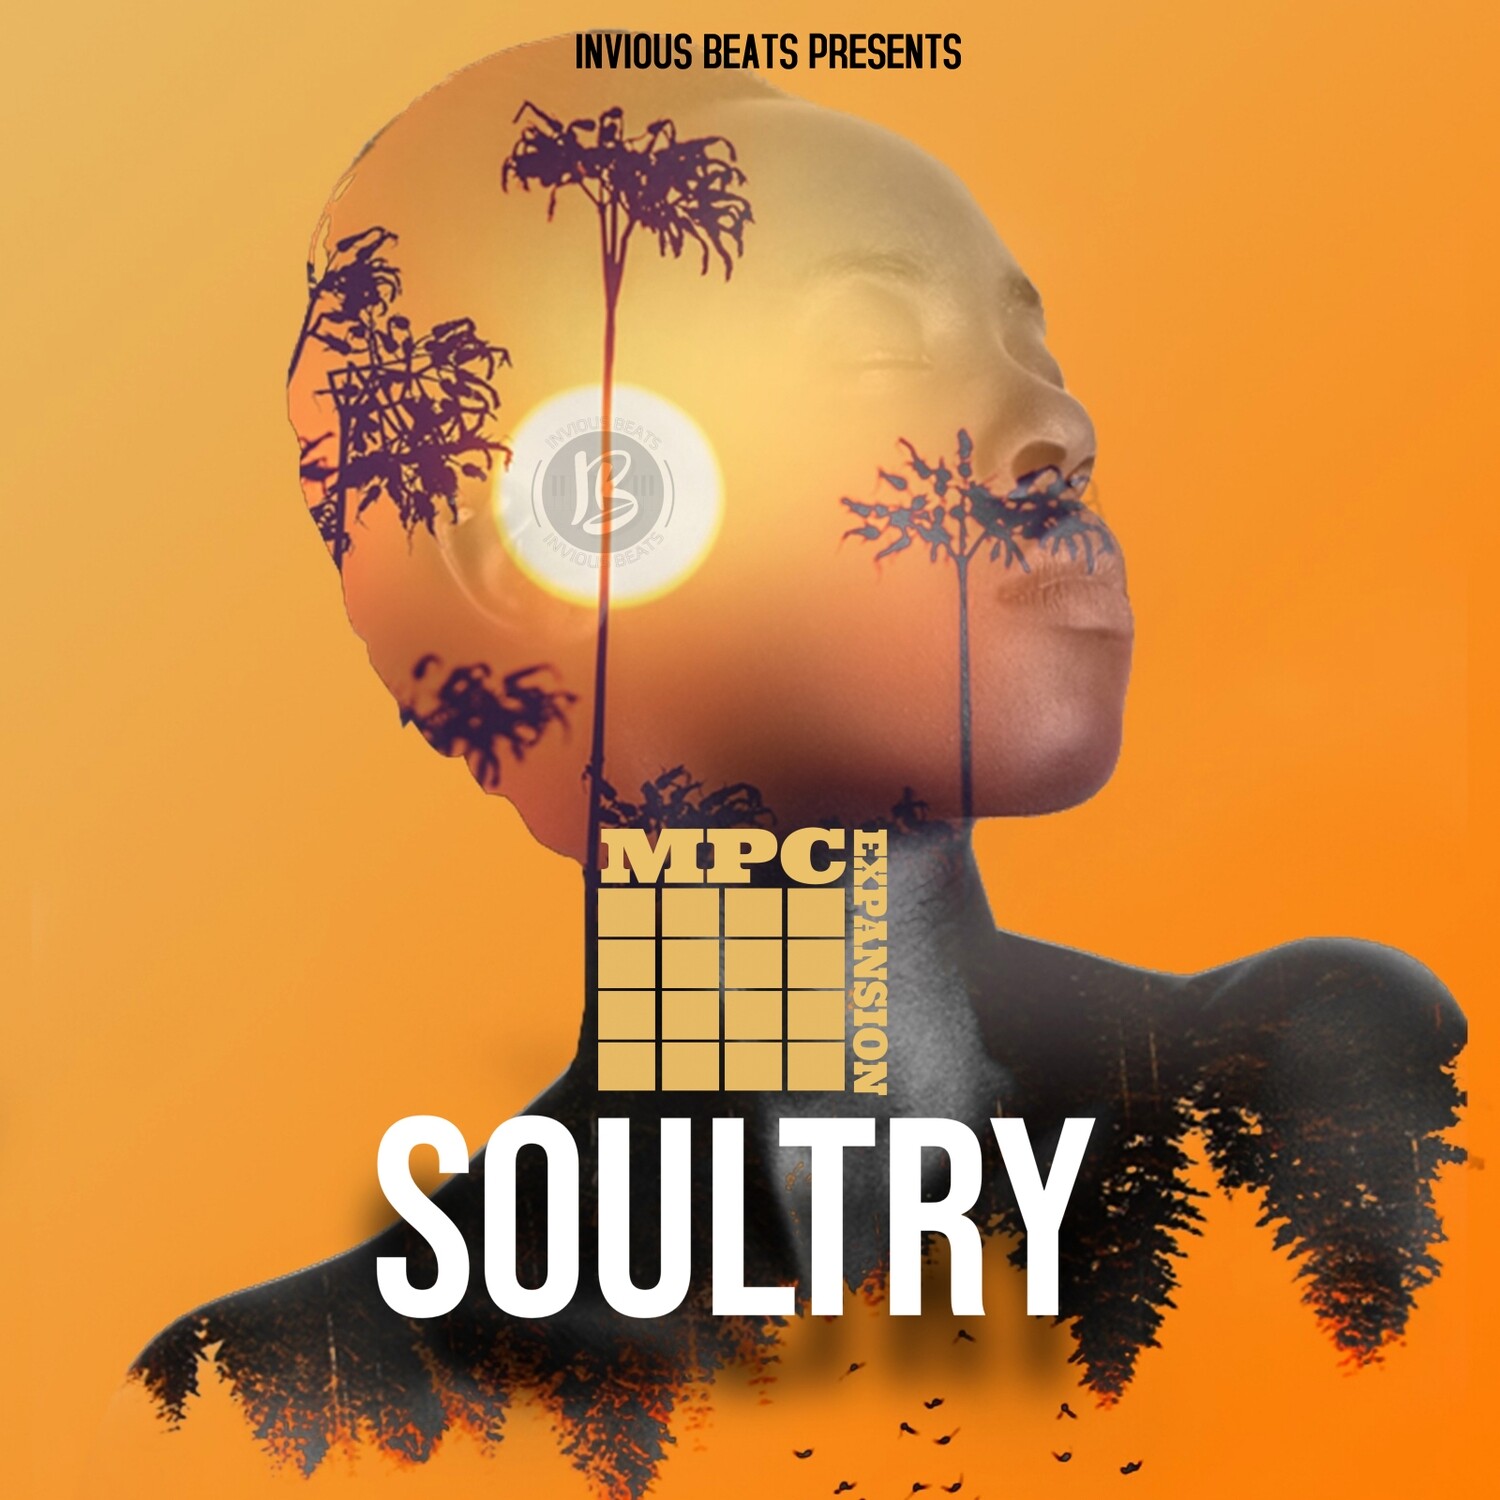 MPC EXPANSION "SOULTRY" by INVIOUS